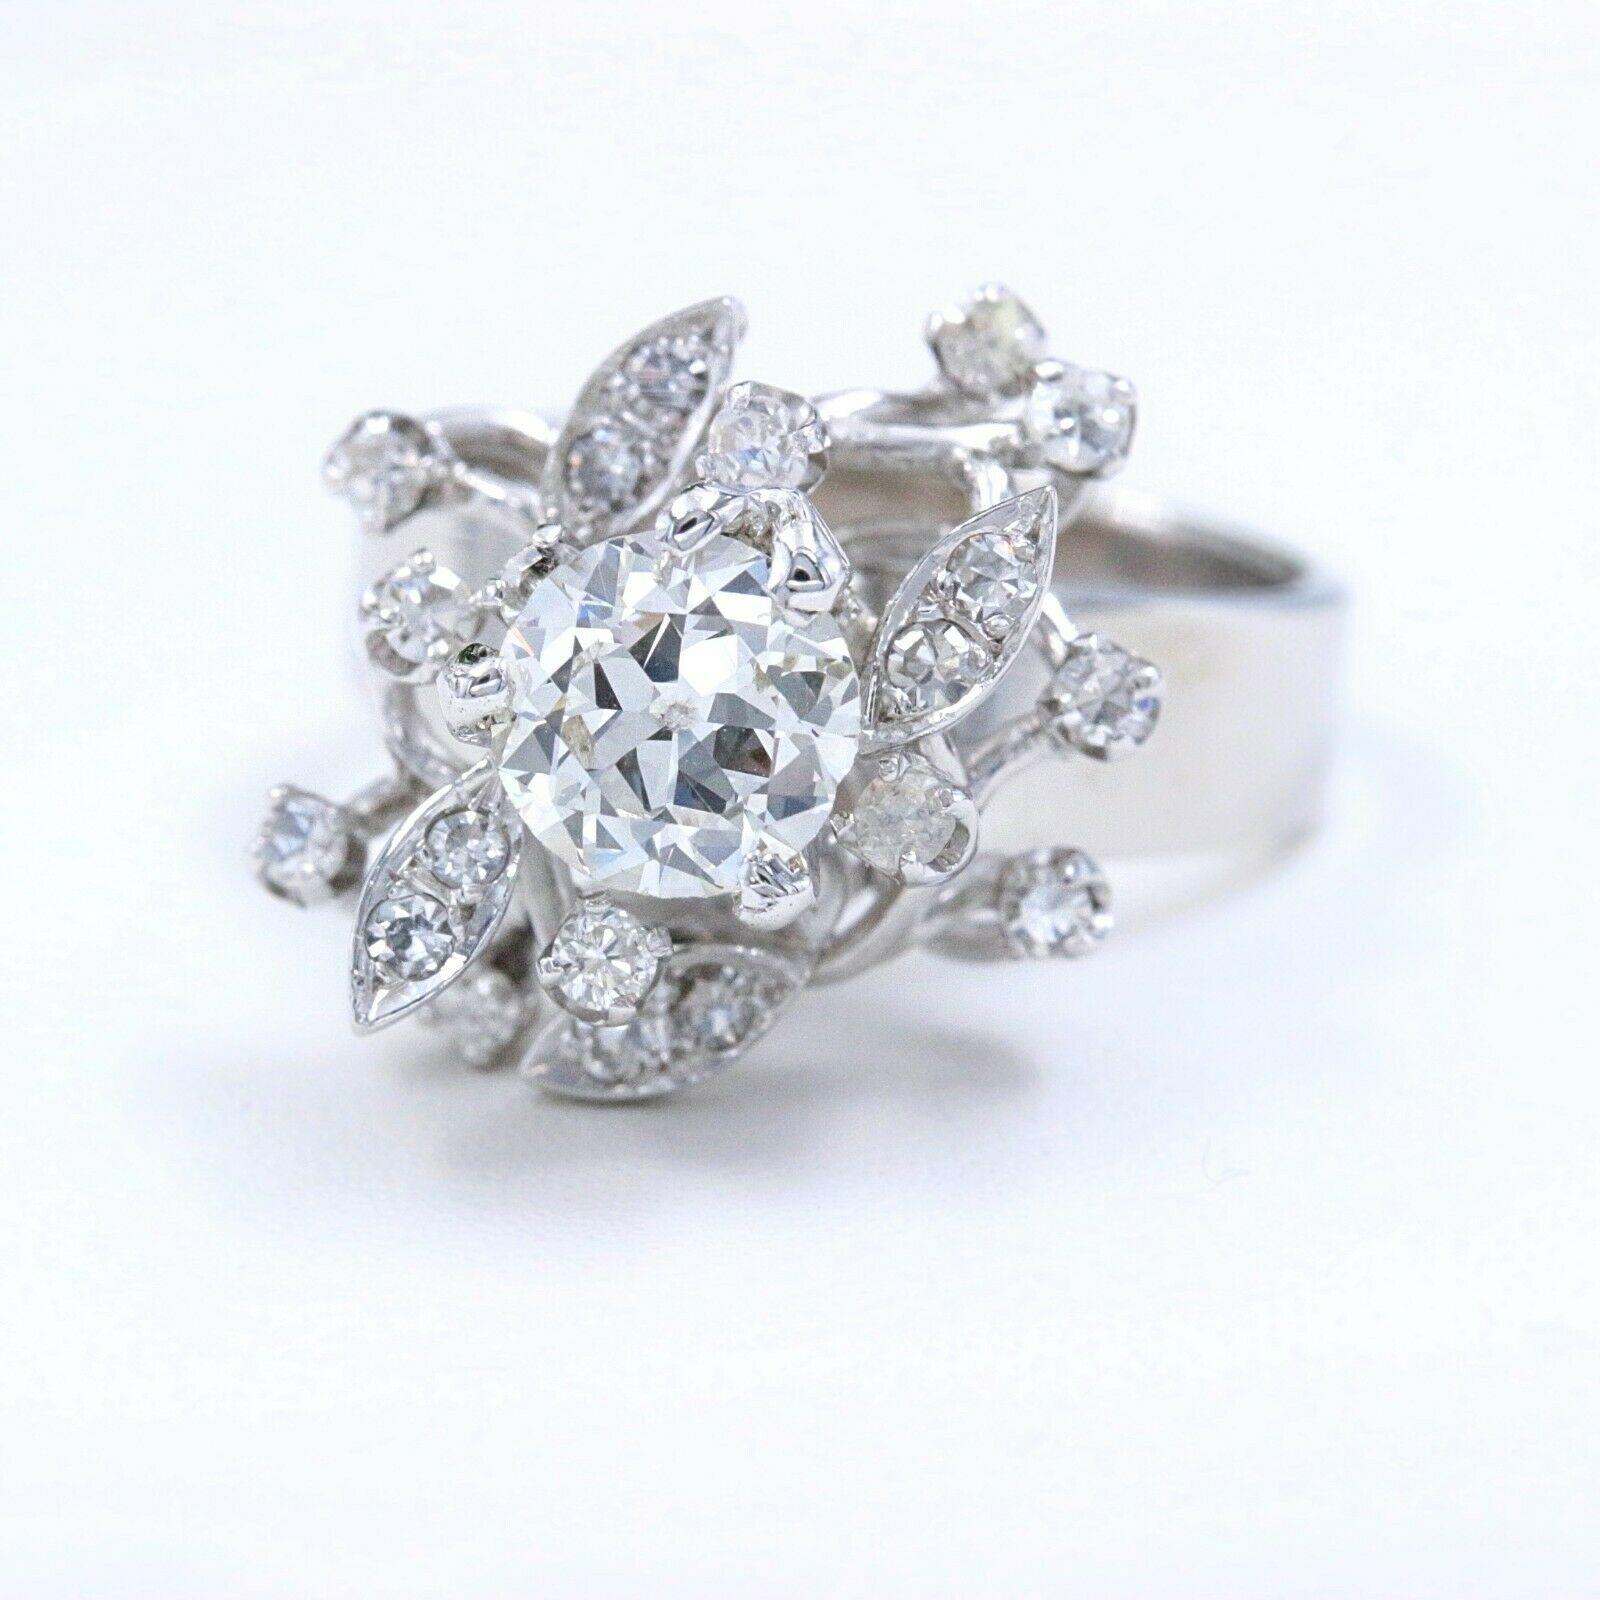 Round Diamond Flower Cocktail Ring

Metal:  18k White Gold
Size:  6 - sizable
Width:  5 MM - 3 MM Band
Height:  14 MM  Width:  13 MM
Total Carat Weight:  1.12 tcw
Center Diamond Shape:  Round Old European Cut 0.80 cts  I color, SI1 clarity
Accent